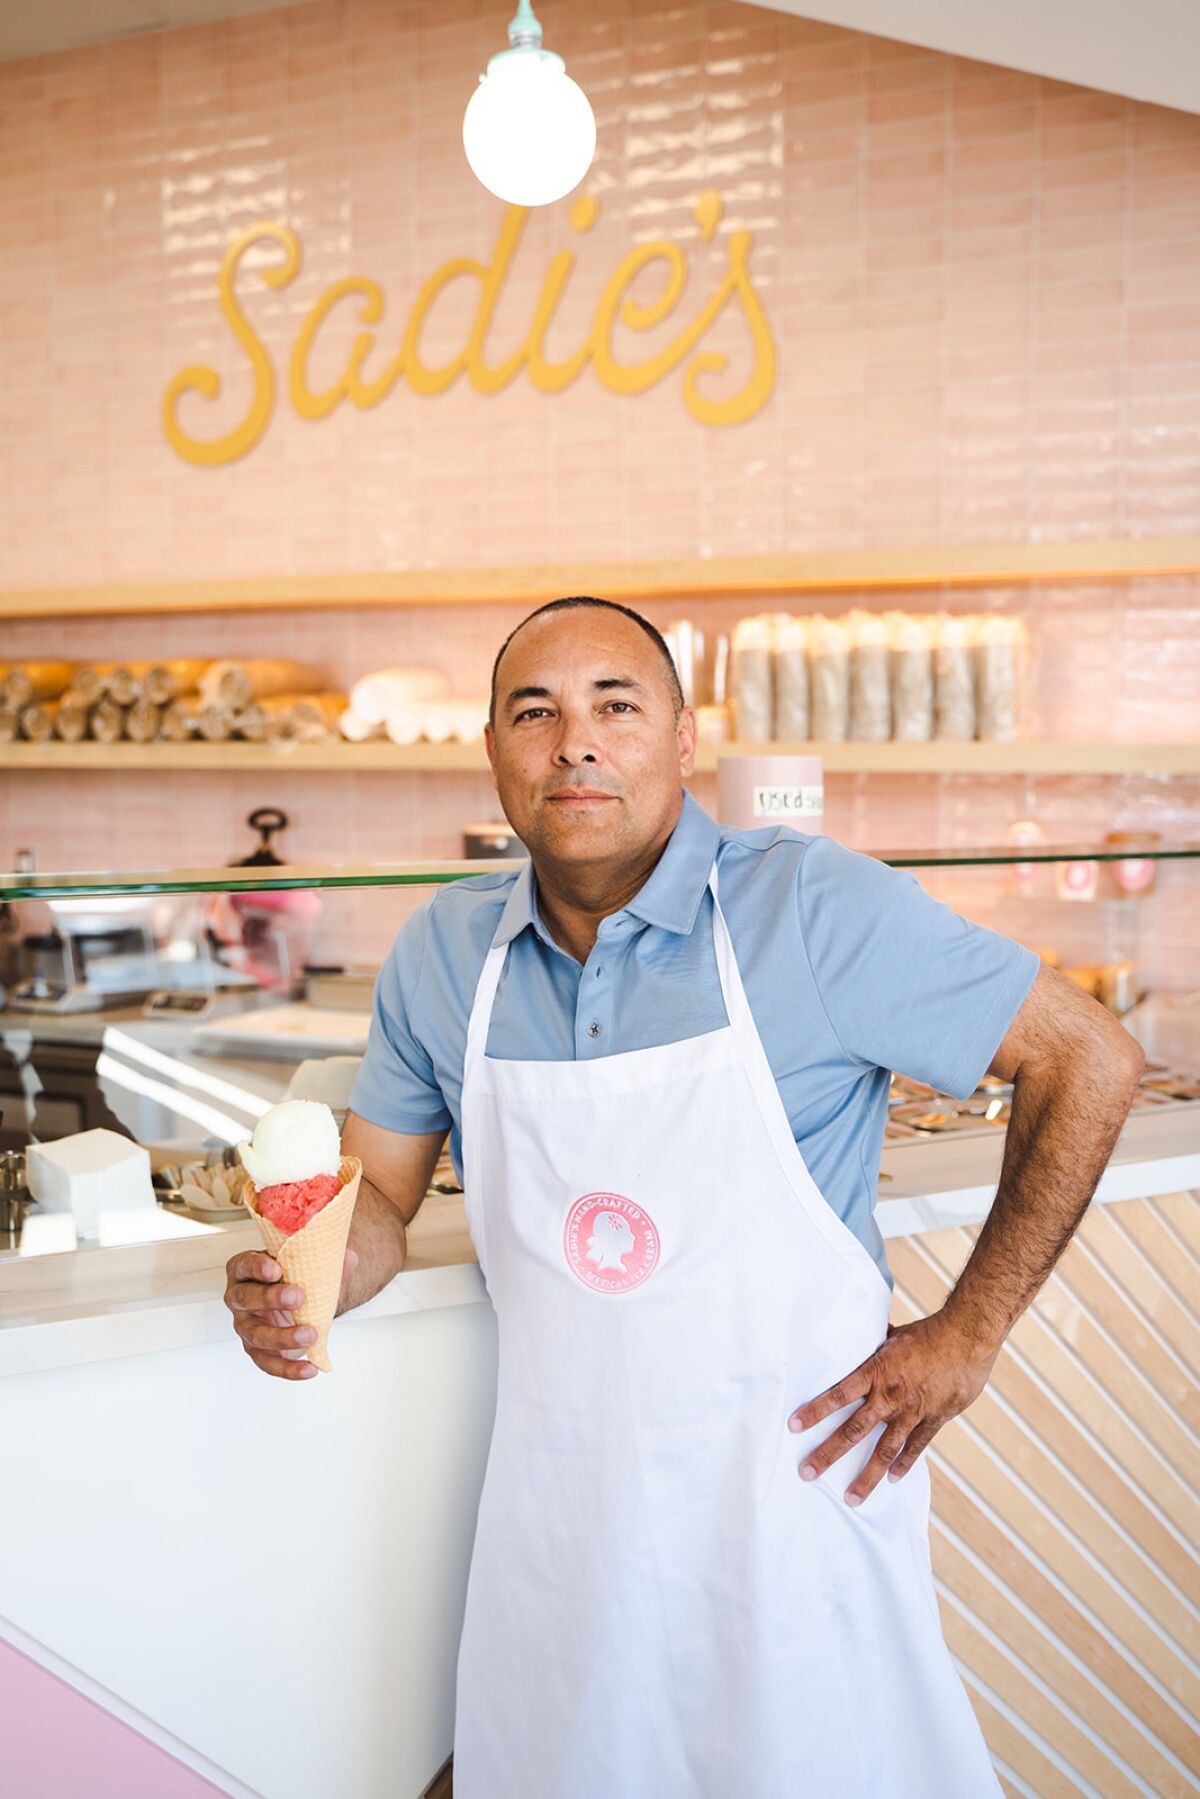 San Diego restaurateur Emilio Tamez launched this new project in April.